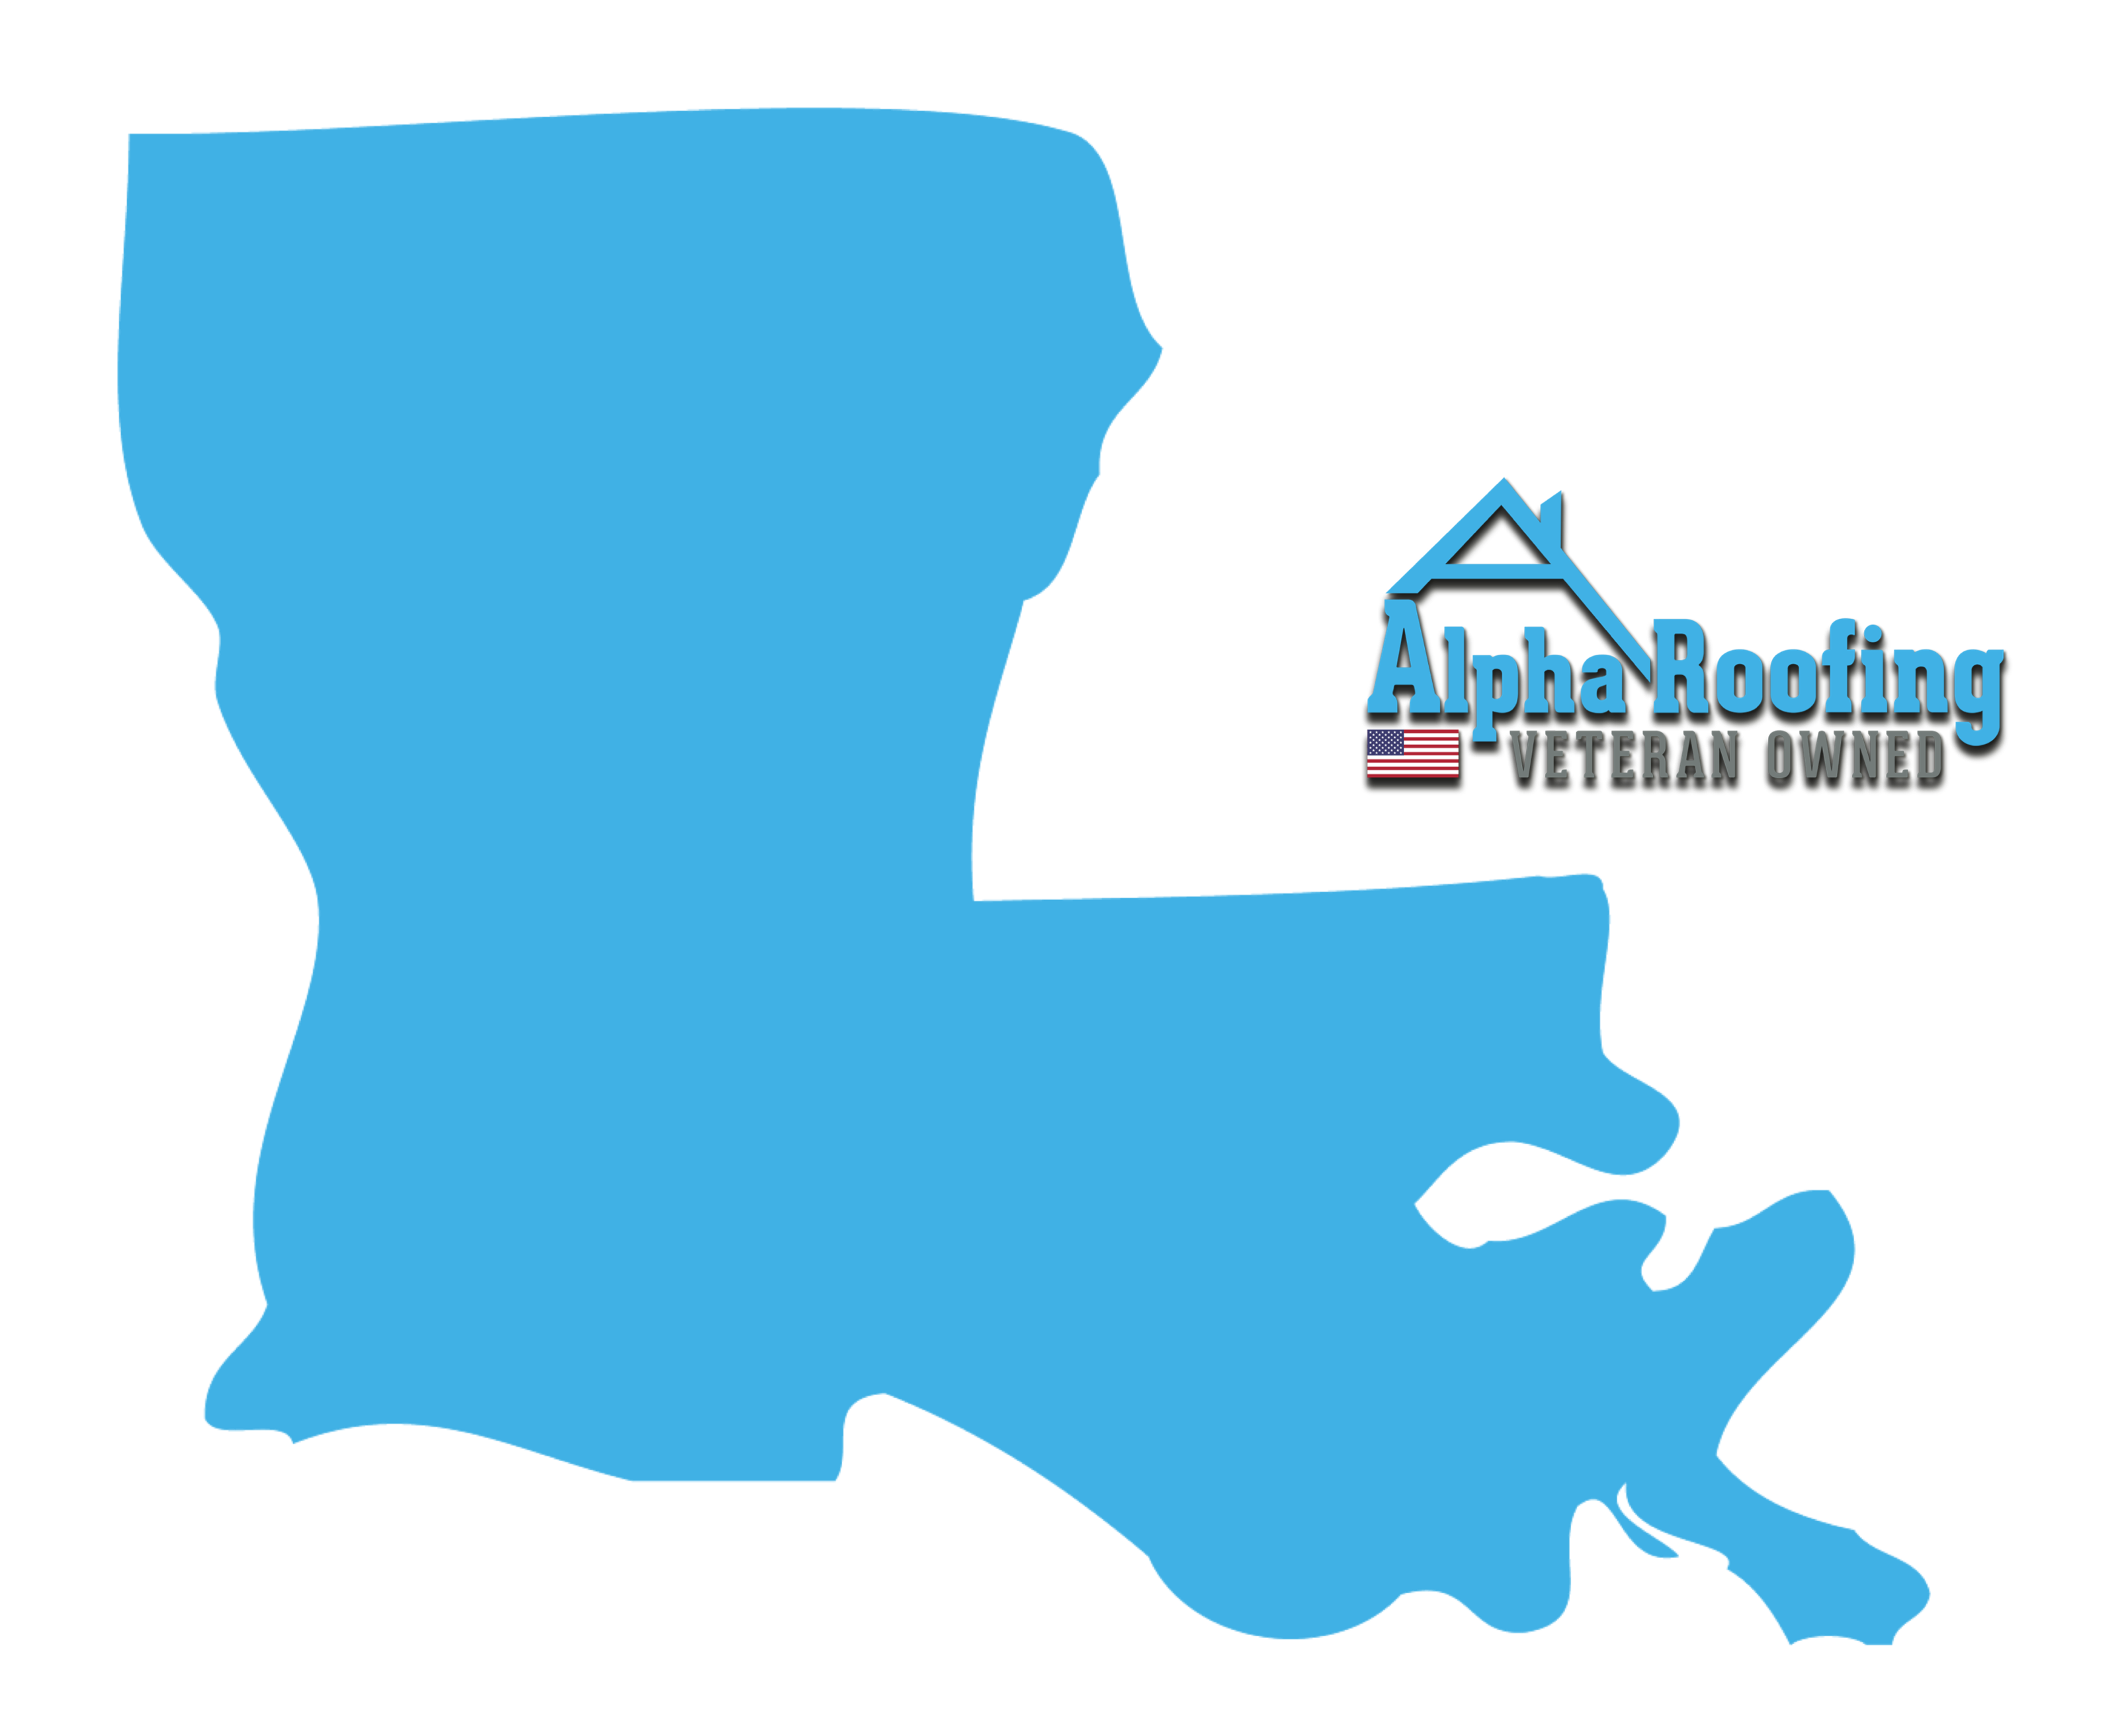 northeast LA is a servicing area icon for Alpha Roofing